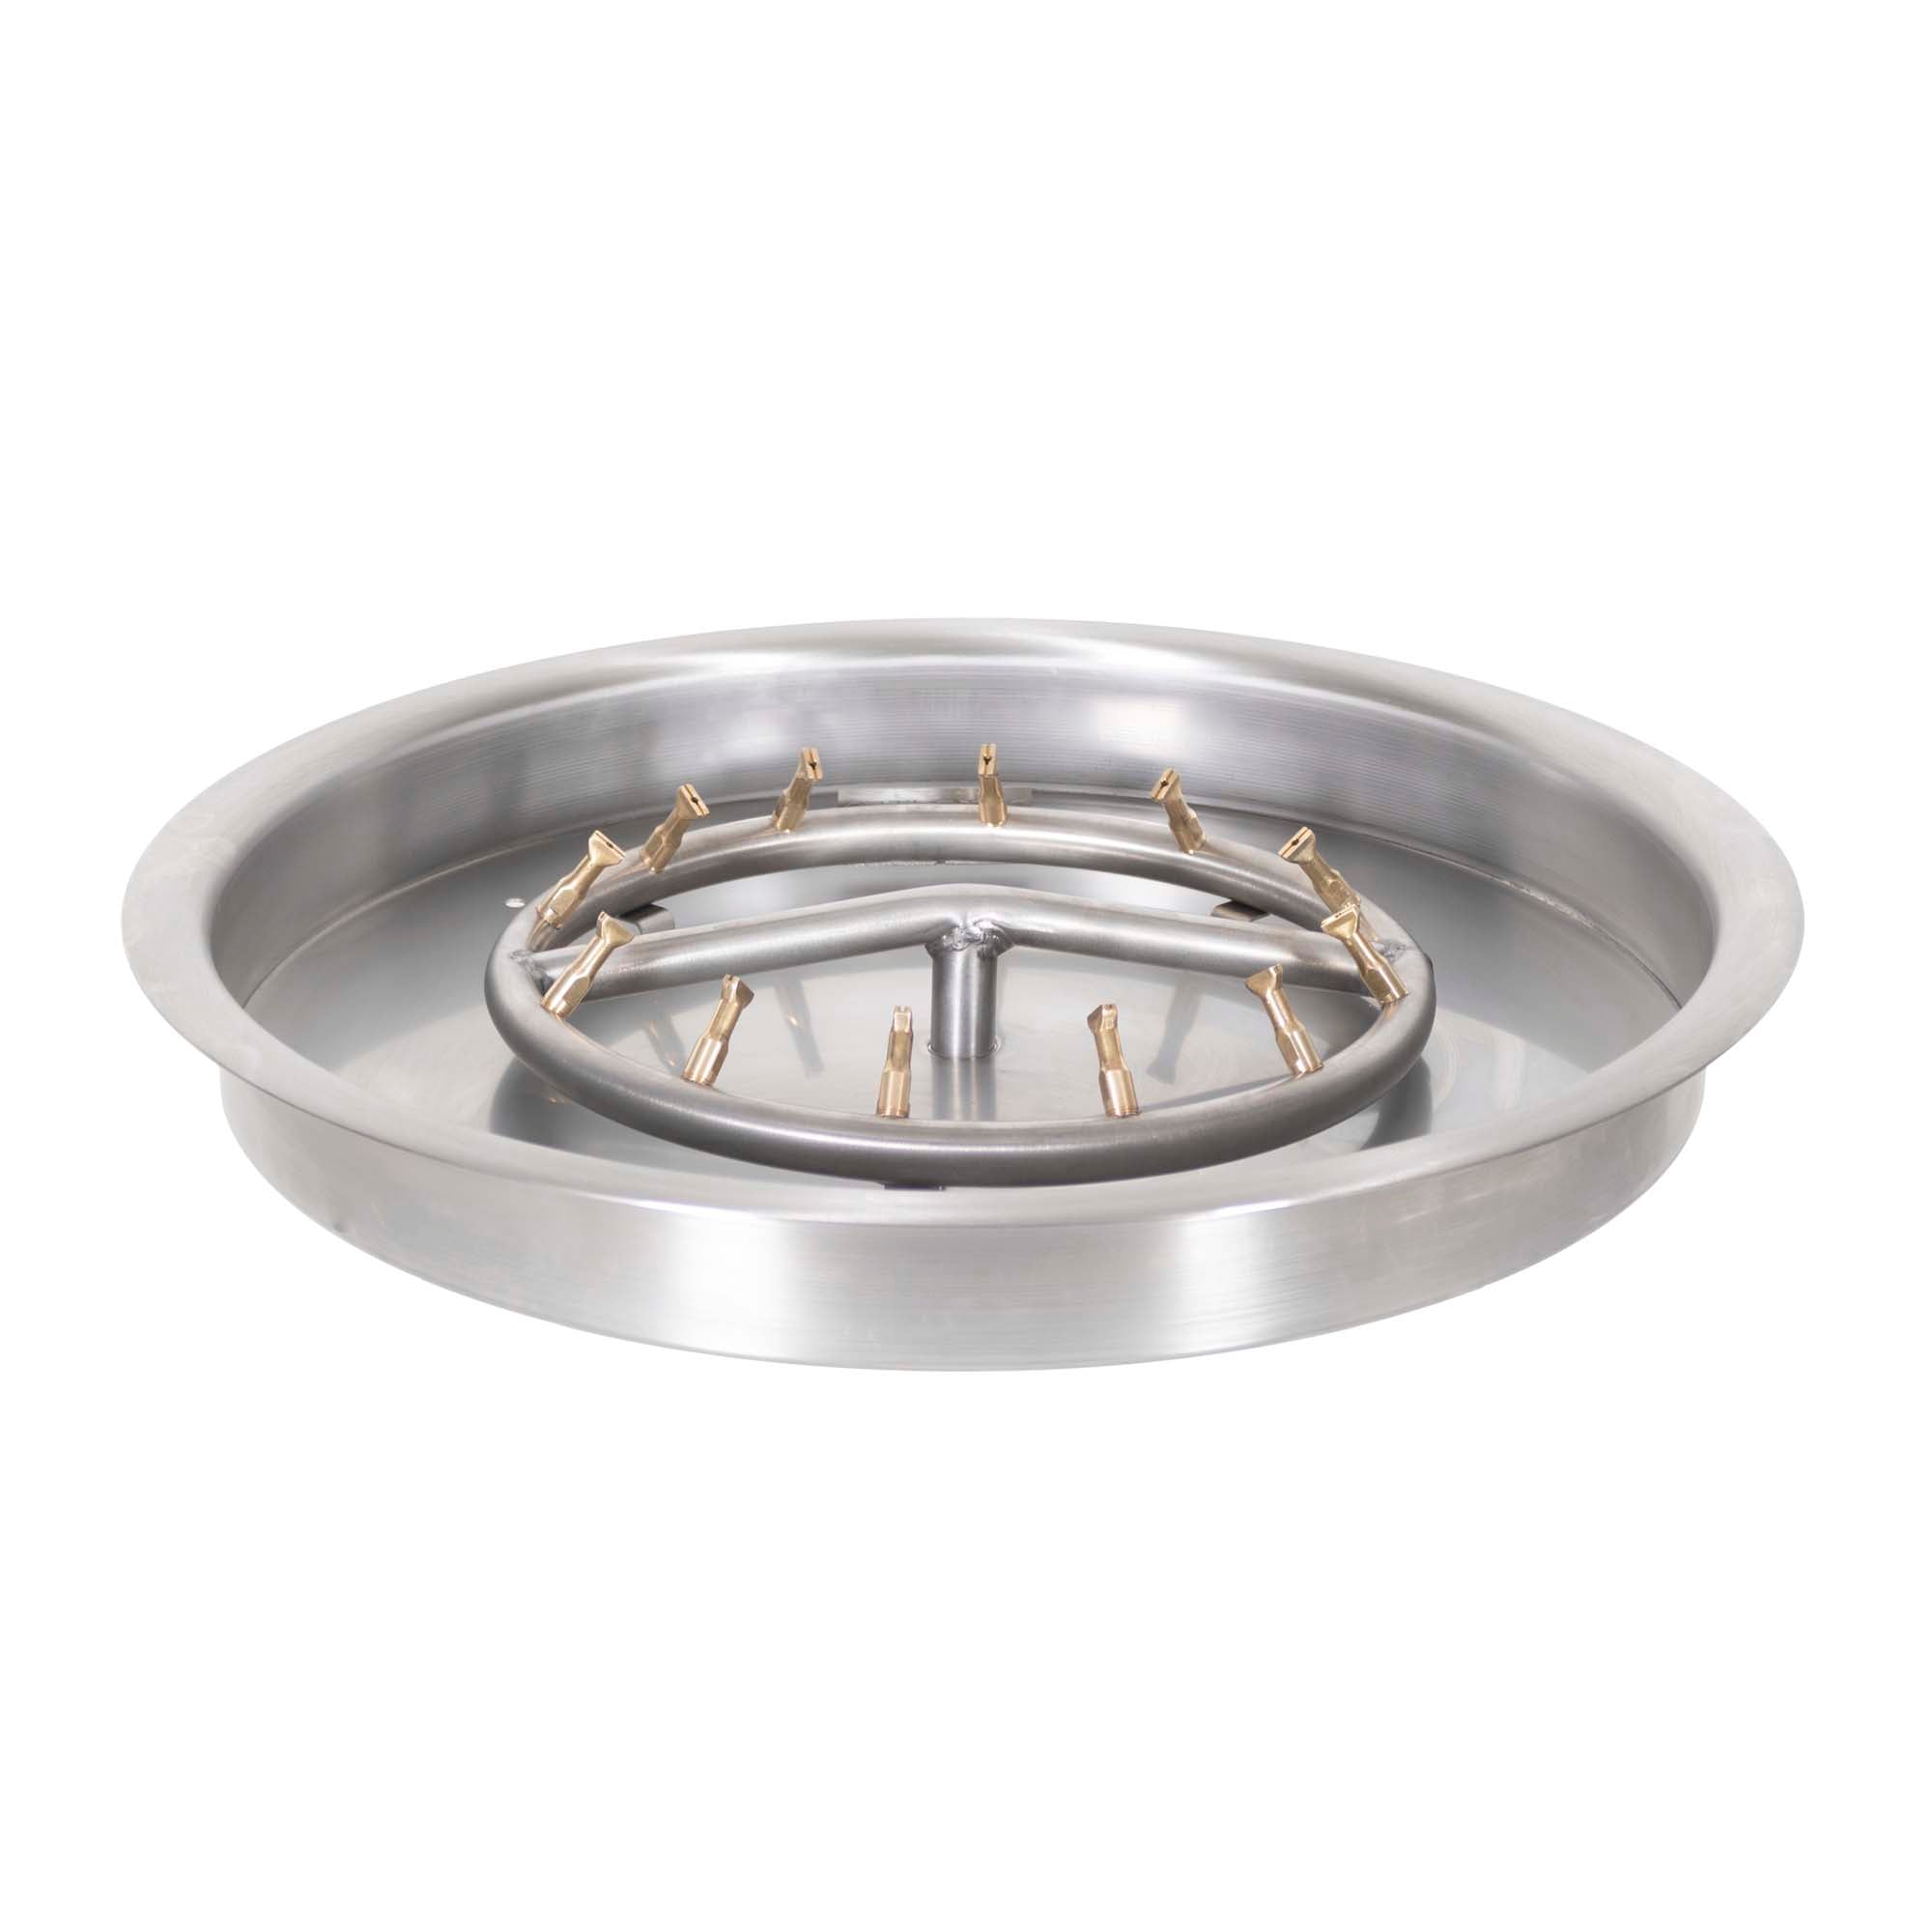 The Outdoor Plus Round Drop-in with Stainless Steel Round Bullet Burner